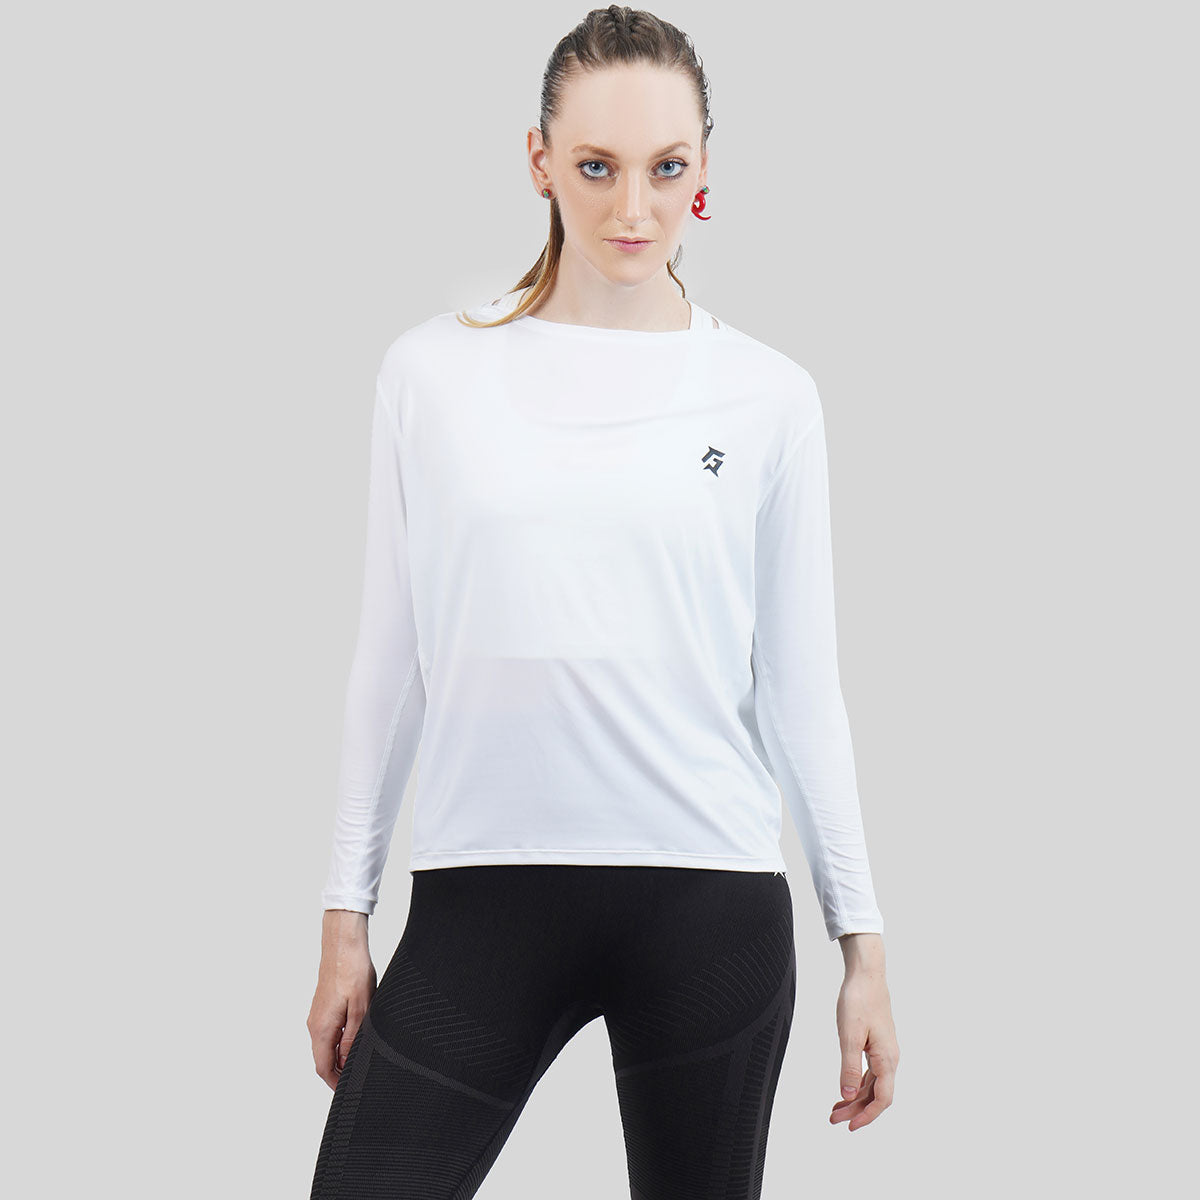 Relaxfit Long Sleeves Tee (White)